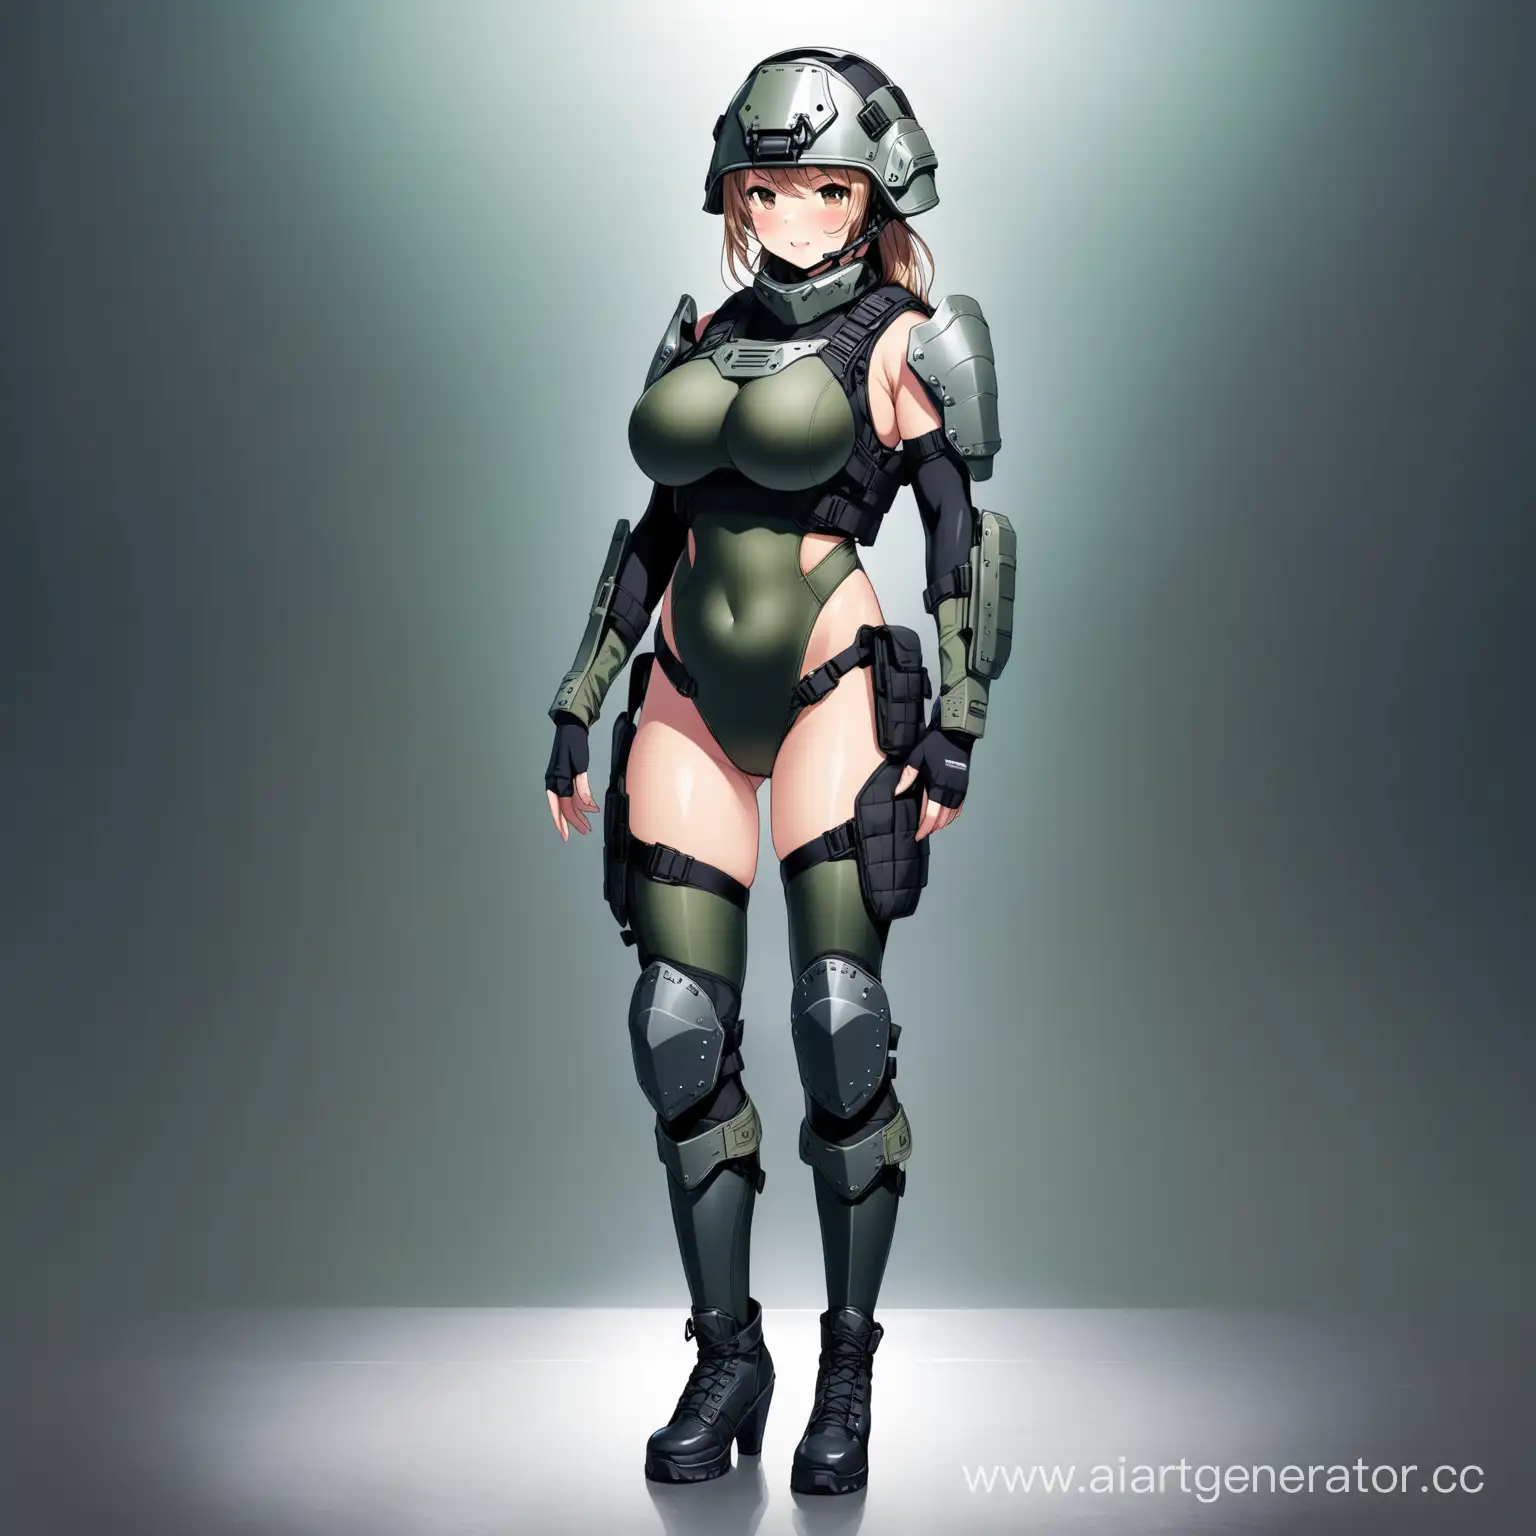 Tactical-Military-Girl-with-Armored-Swimsuit-and-ThighHigh-Stockings